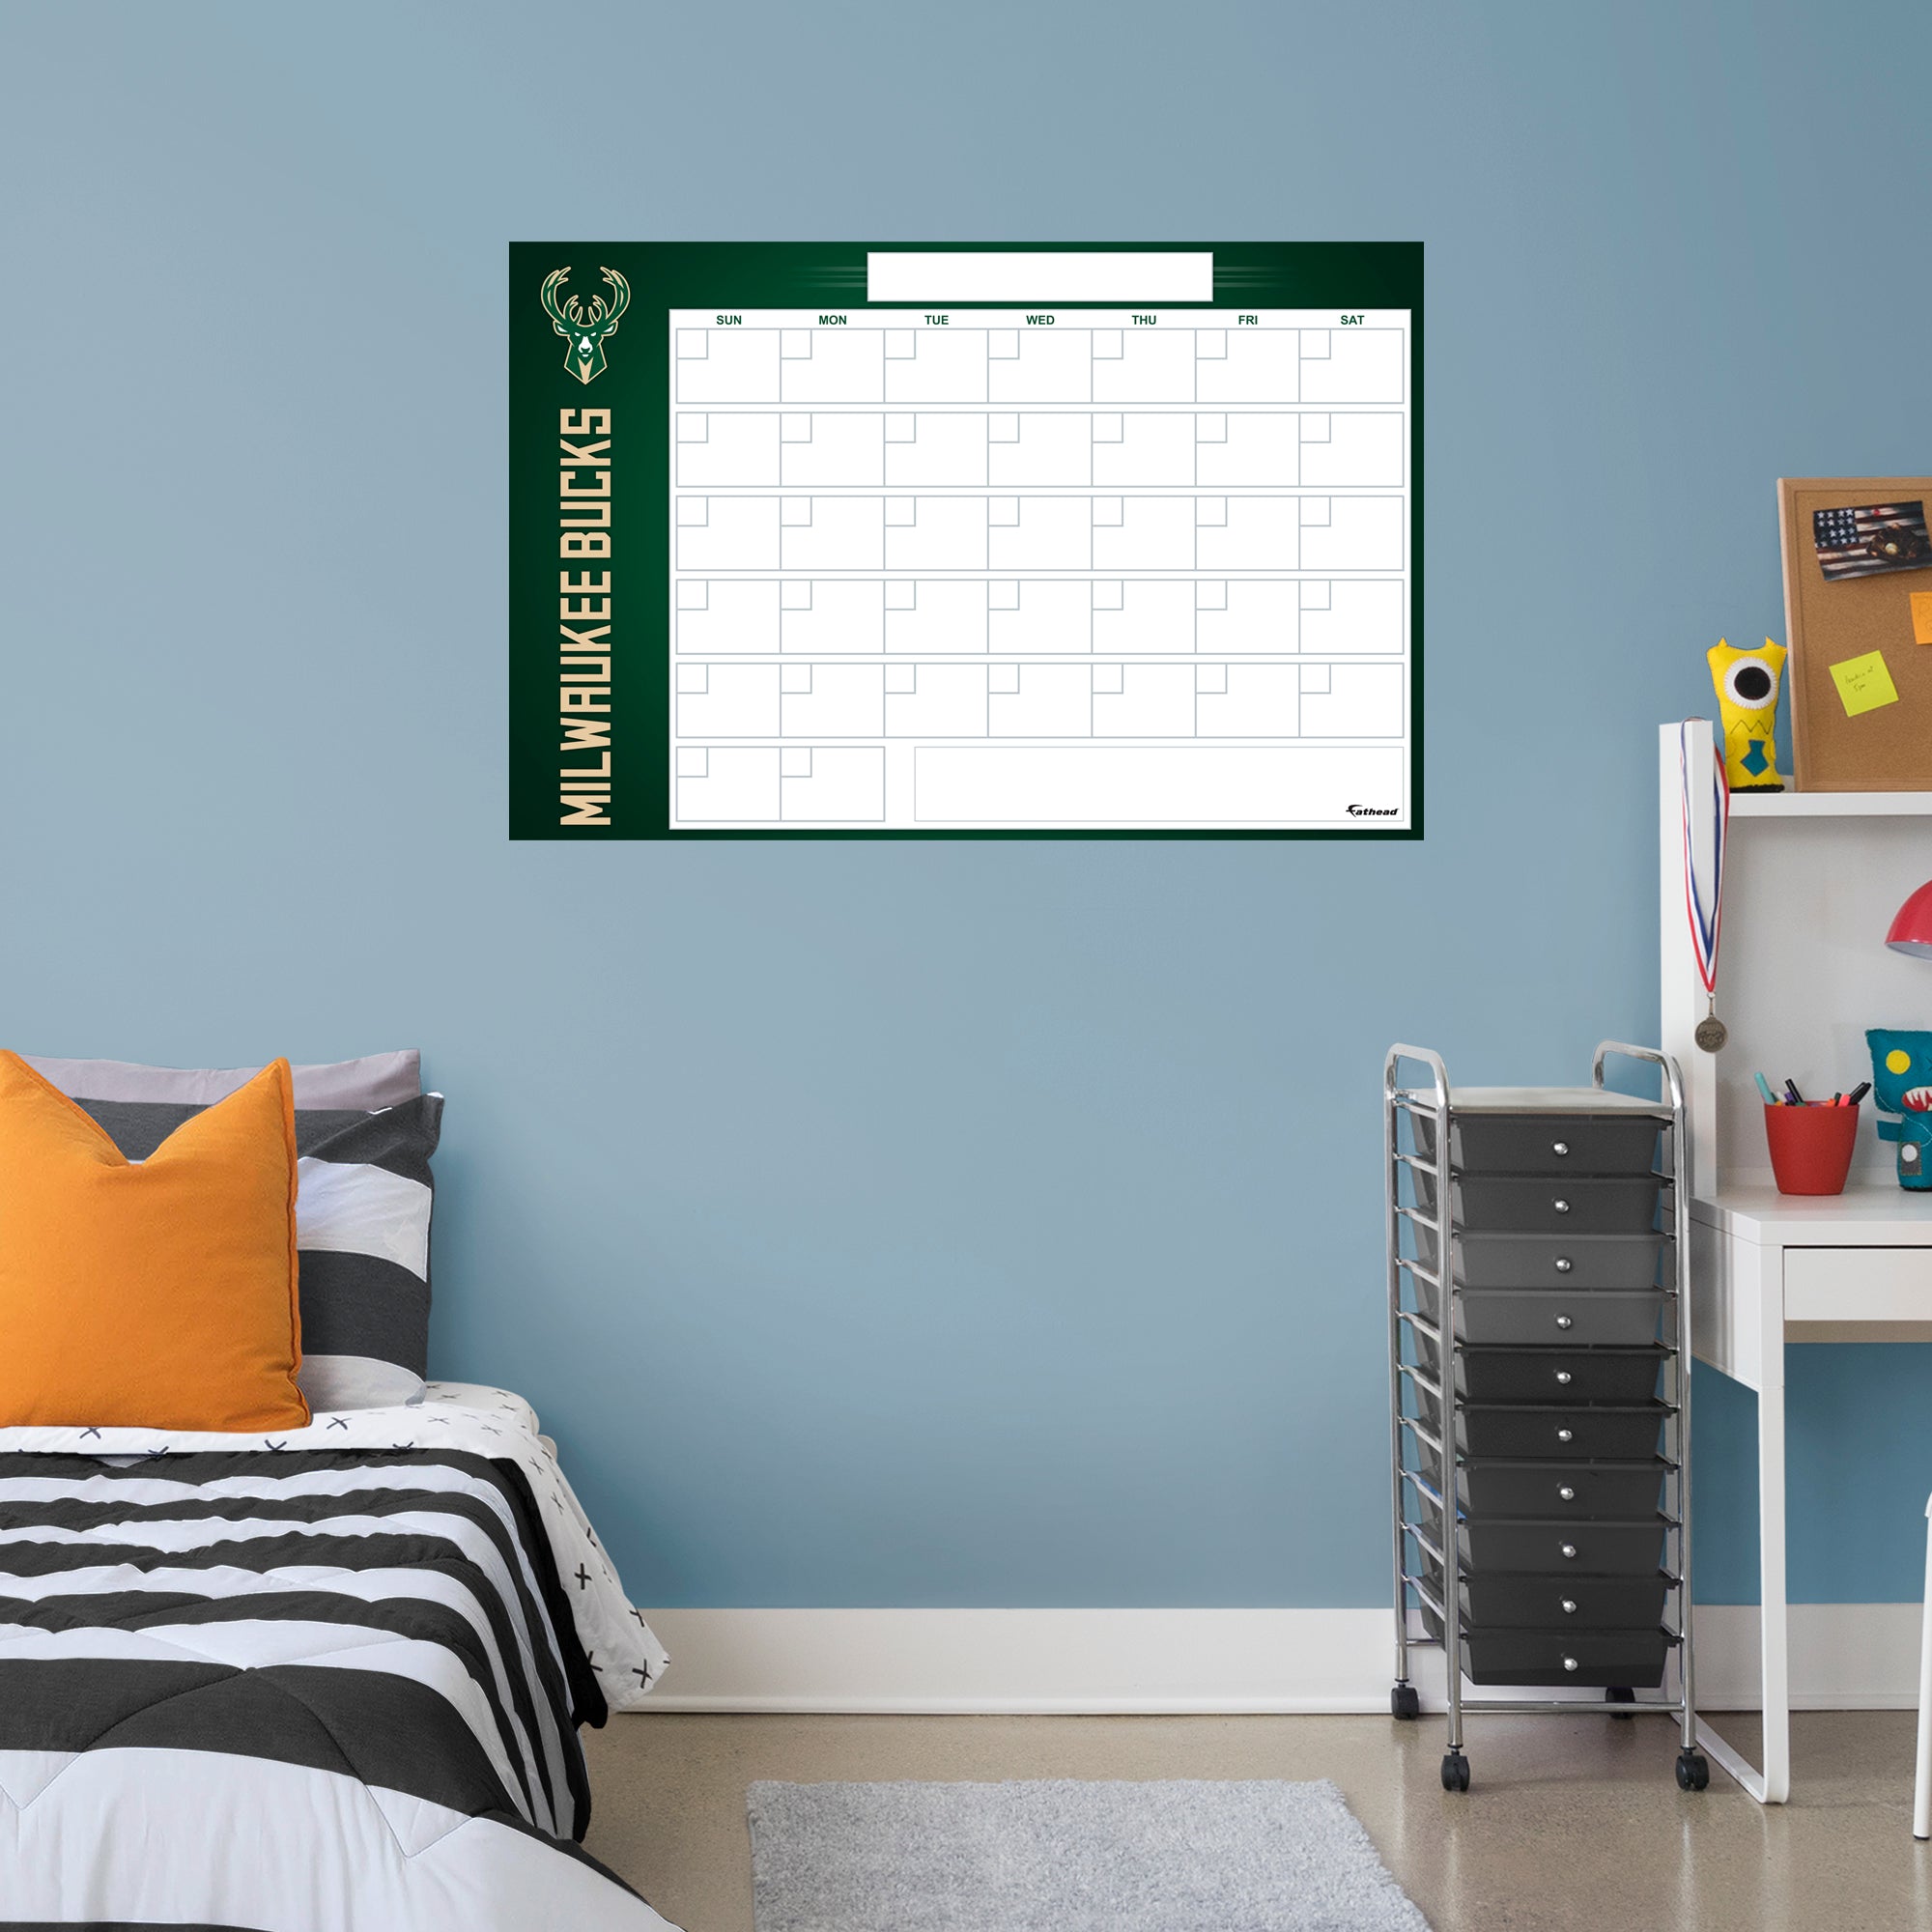 Milwaukee Bucks Dry Erase Calendar - Officially Licensed NBA Removable Wall Decal Giant Decal (34"W x 52"H) by Fathead | Vinyl